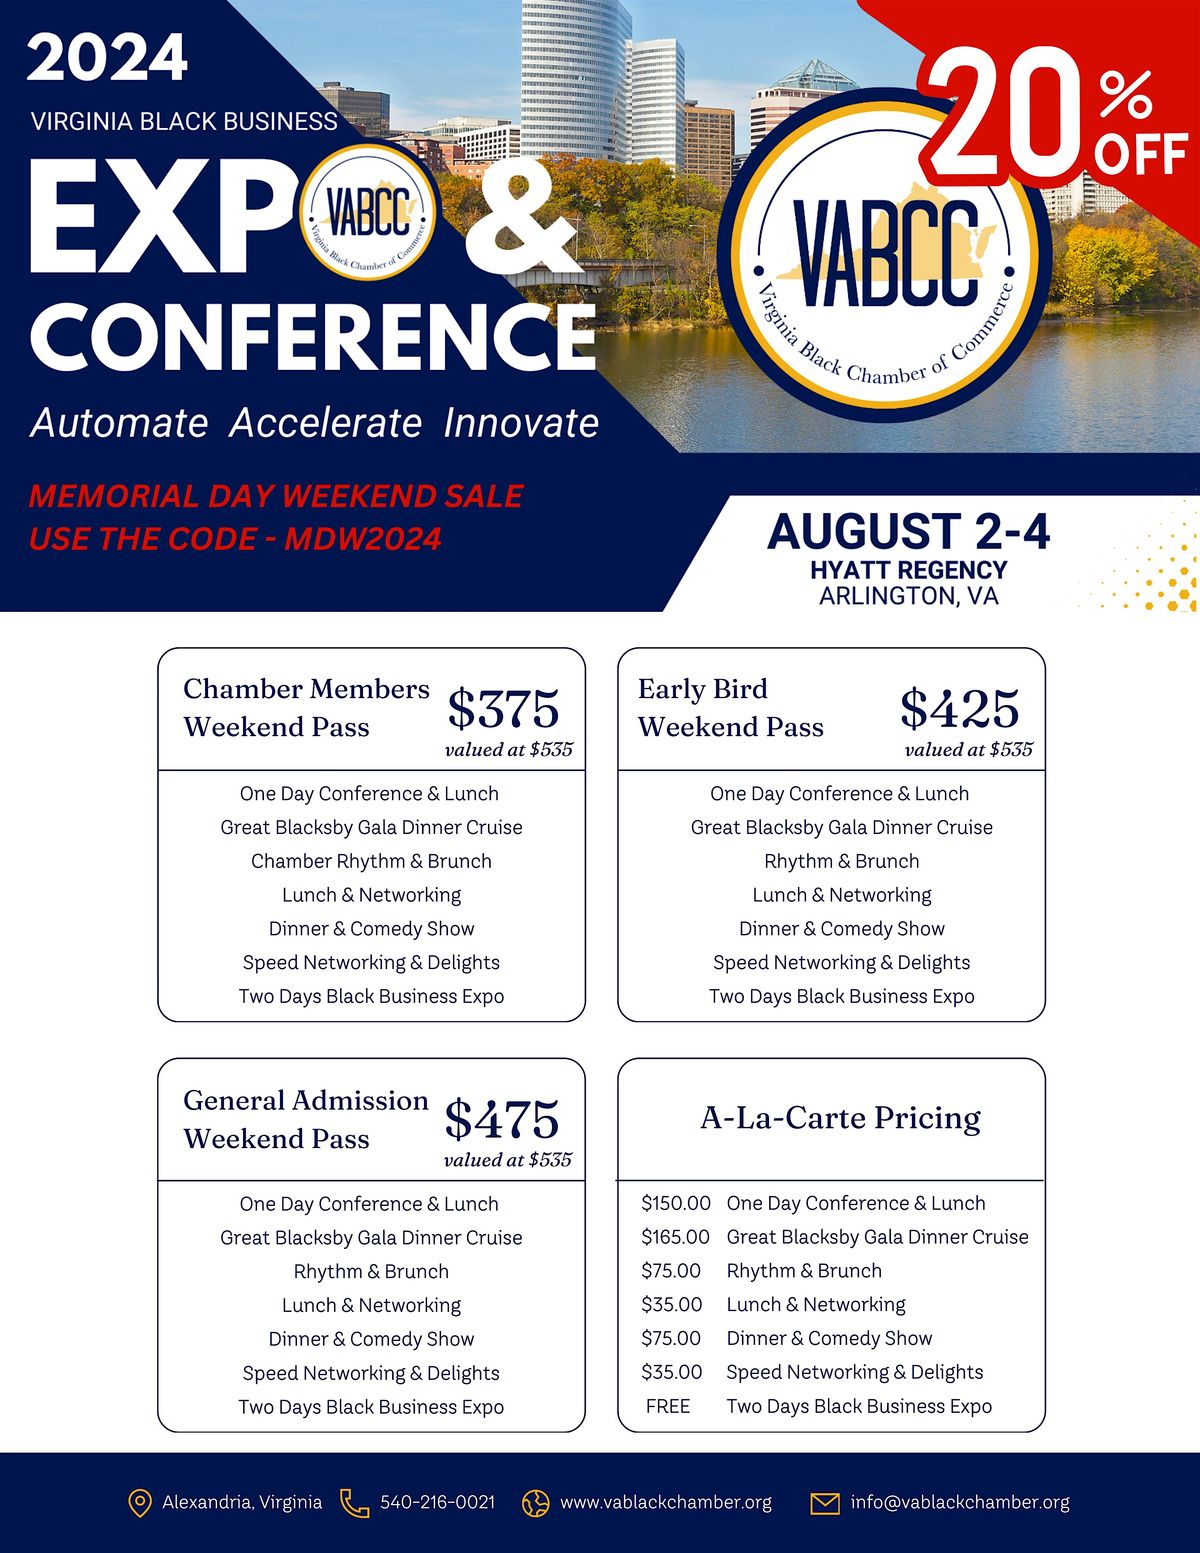 5th Annual Virginia Black Business Expo & Conference